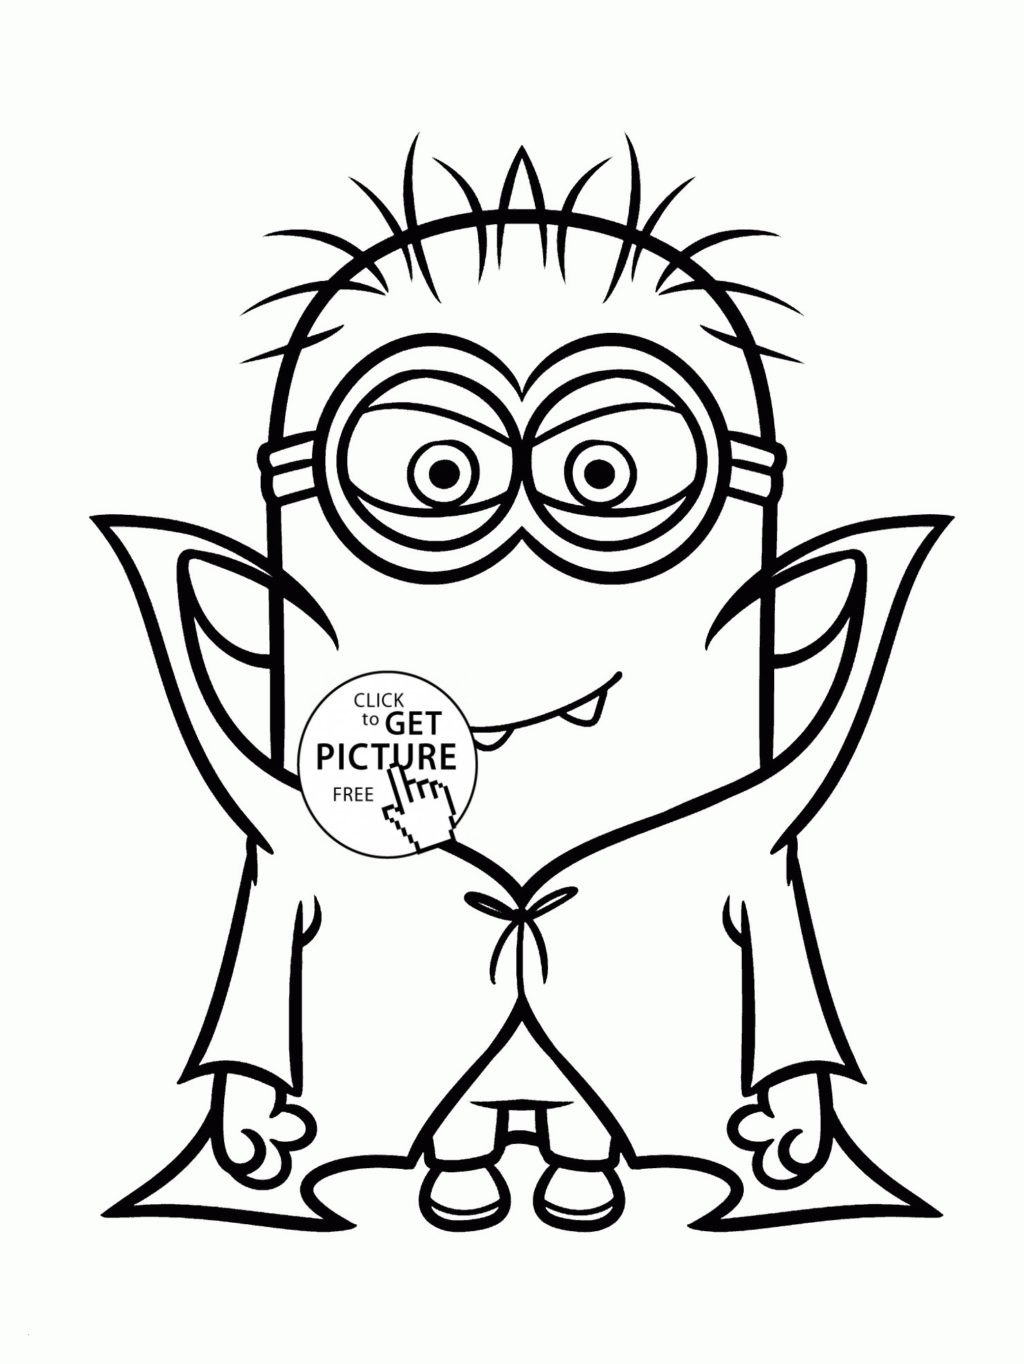 Free Scary Halloween Coloring Pages Coloring Book World 66 Tremendous Free Halloween Coloring Pages